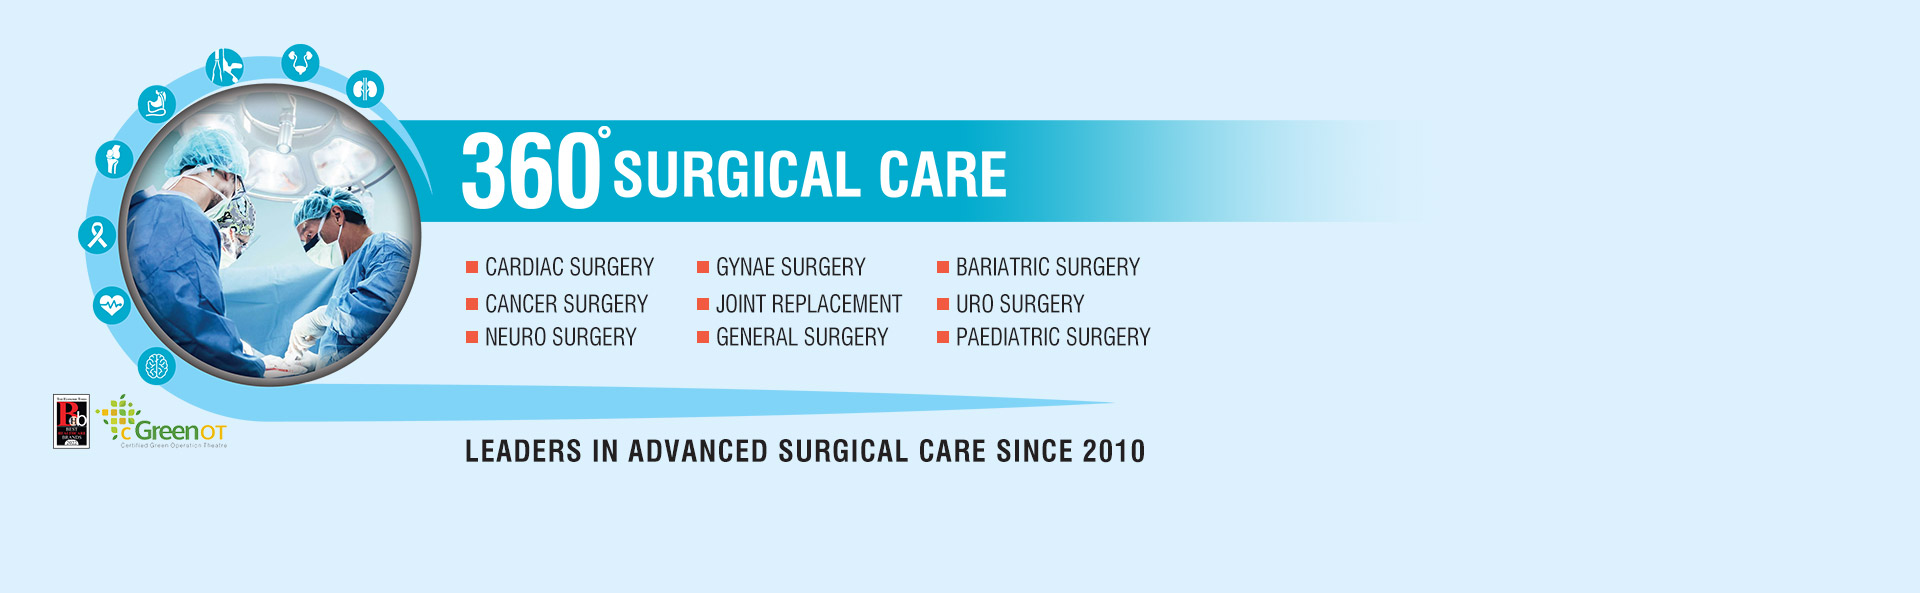 Leaders in Advanced Surgical Care Since 2010.